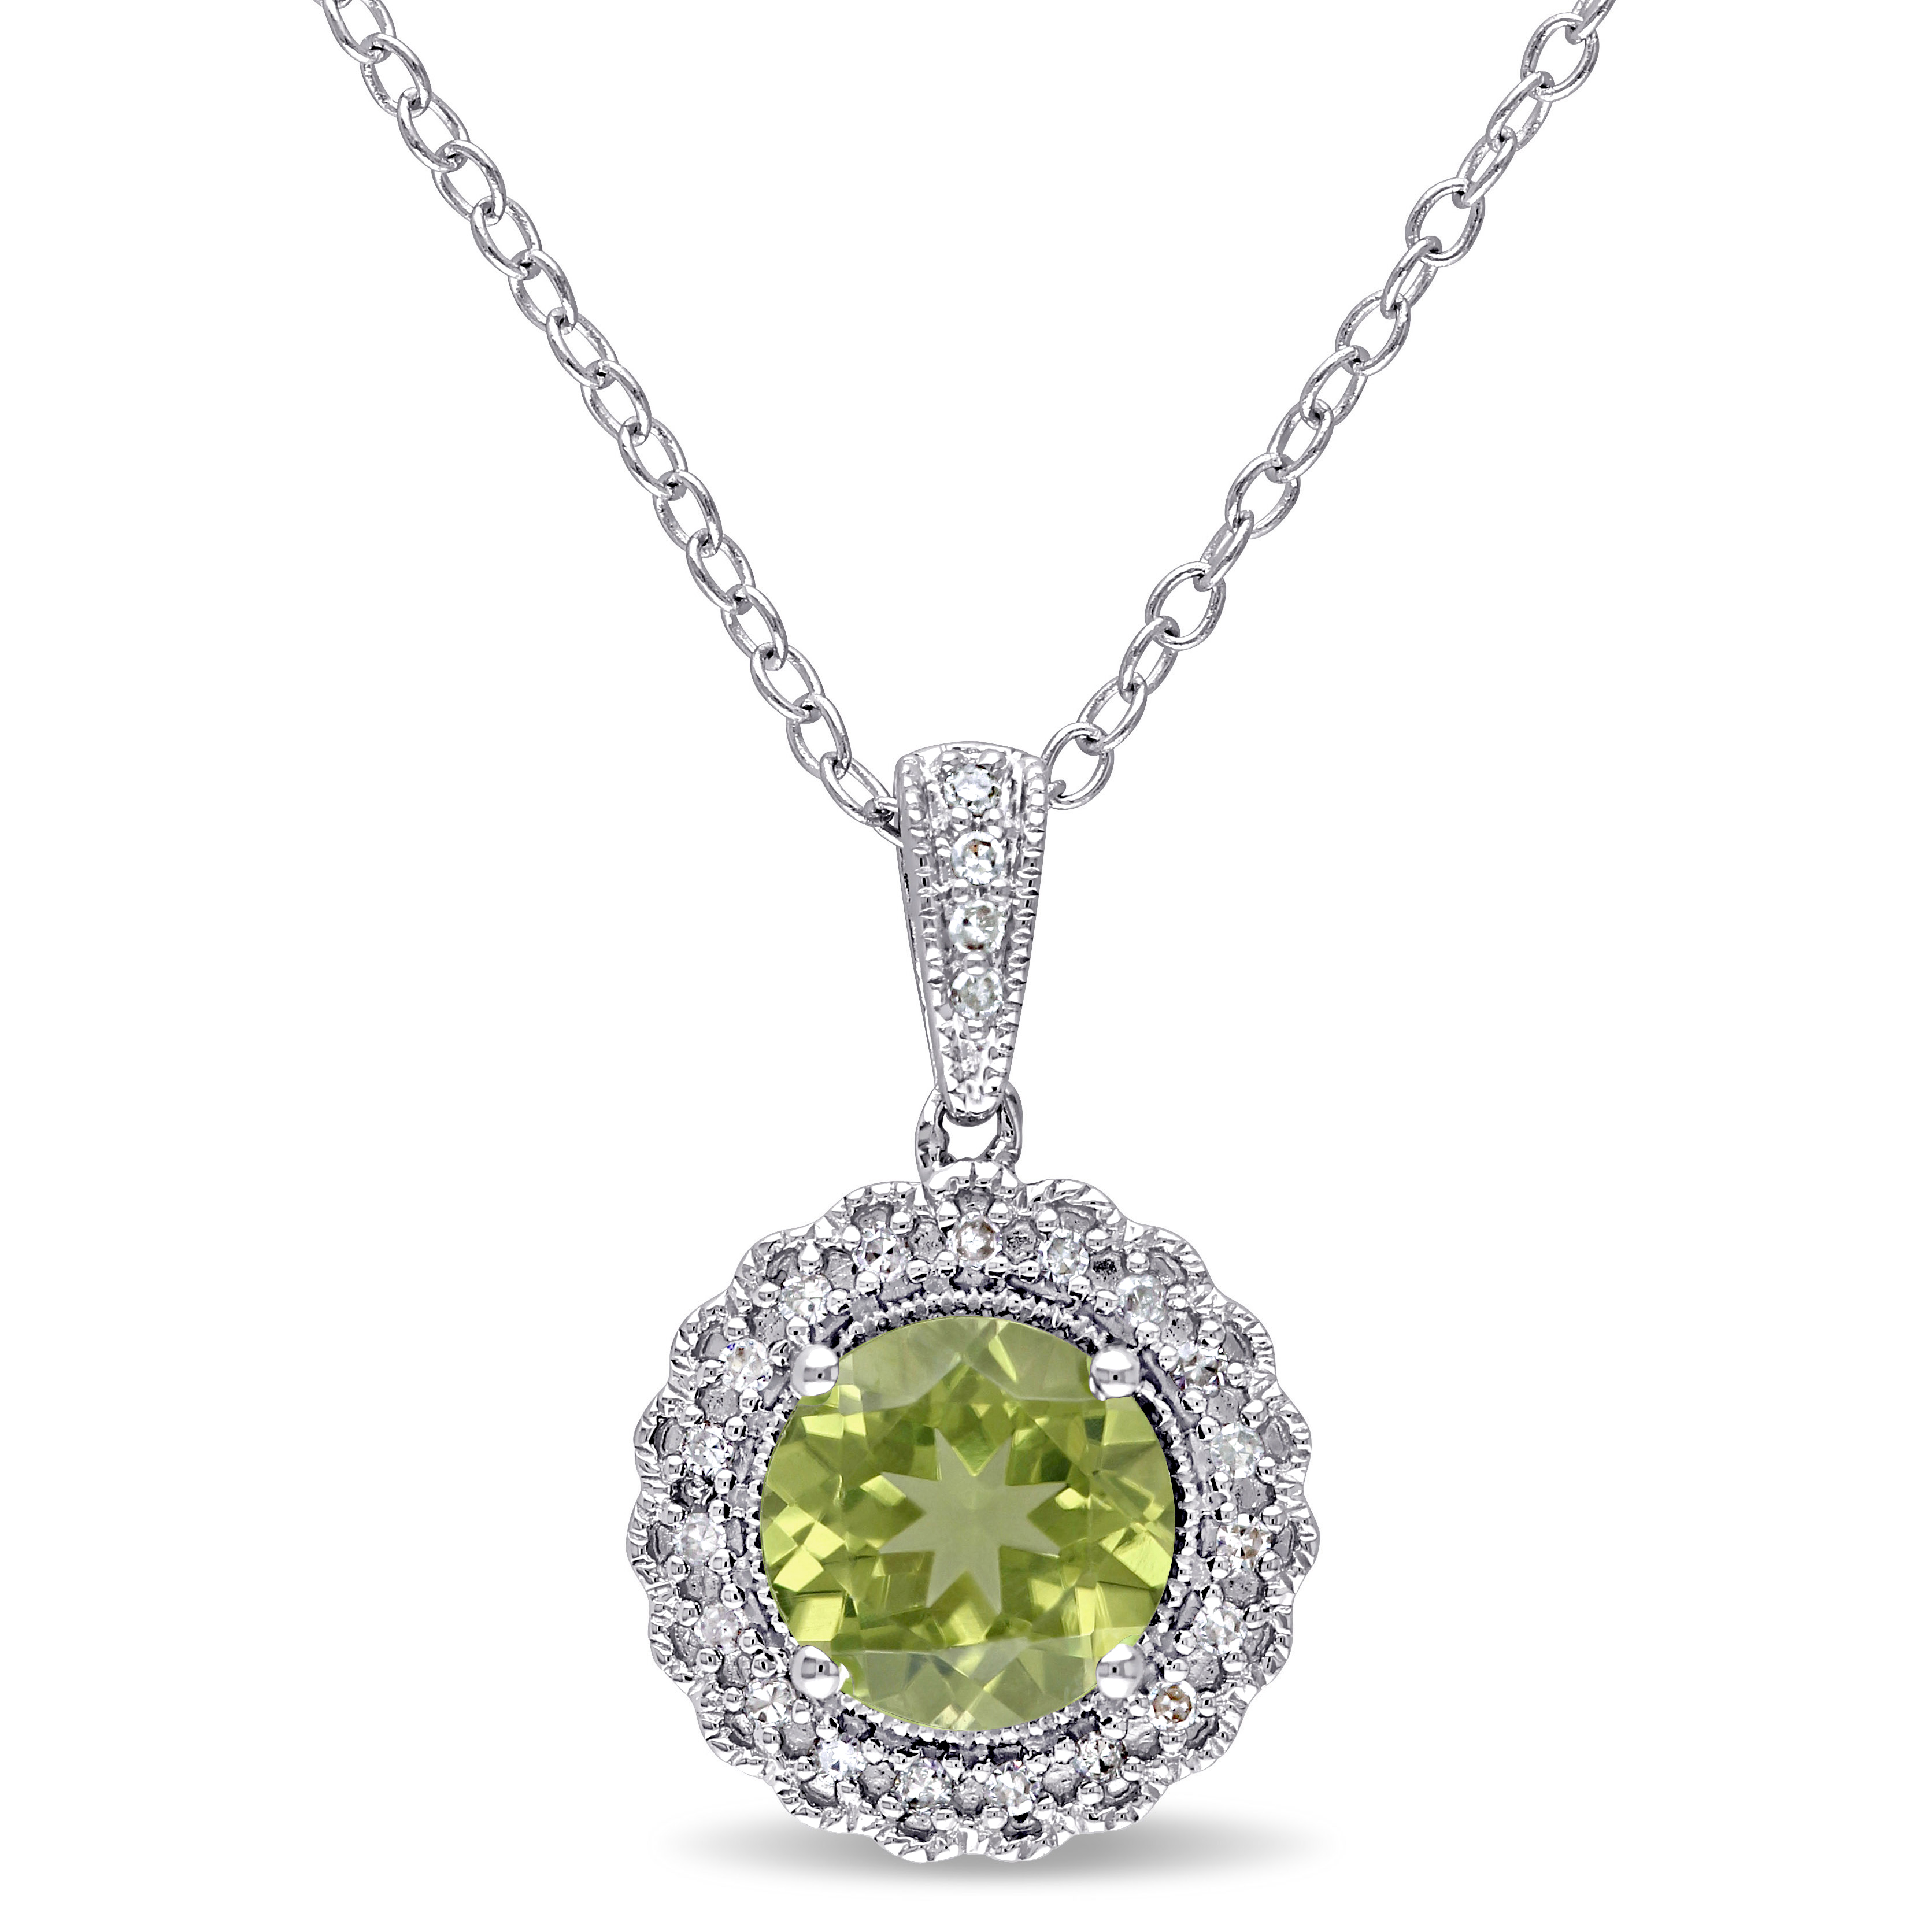 1/10 CT TW Diamond and Peridot Halo Pendant with Chain in Sterling Silver